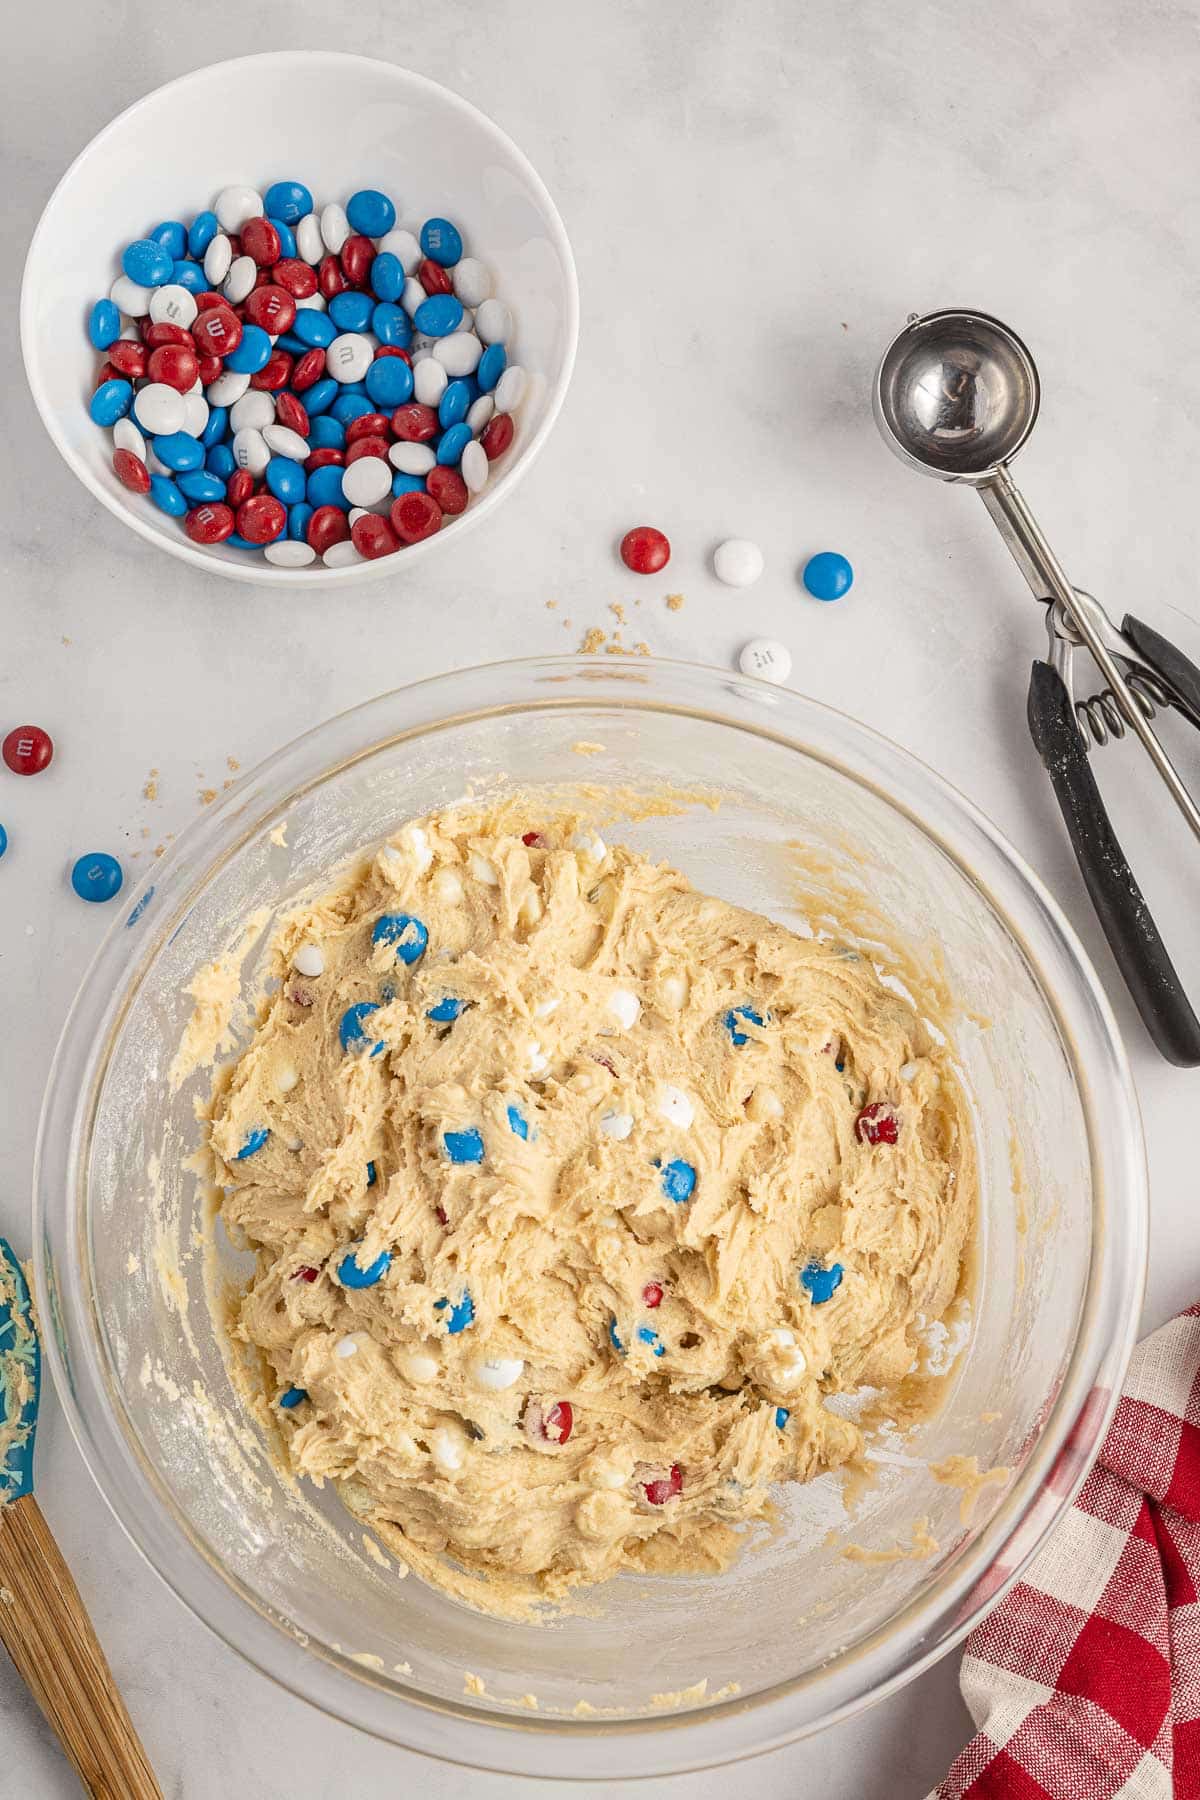 A clear bowl contains cookie dough mixed with red, white, and blue candy-coated chocolates. Nearby are a metal scoop, a white bowl with more chocolates, and a red and white checkered cloth.